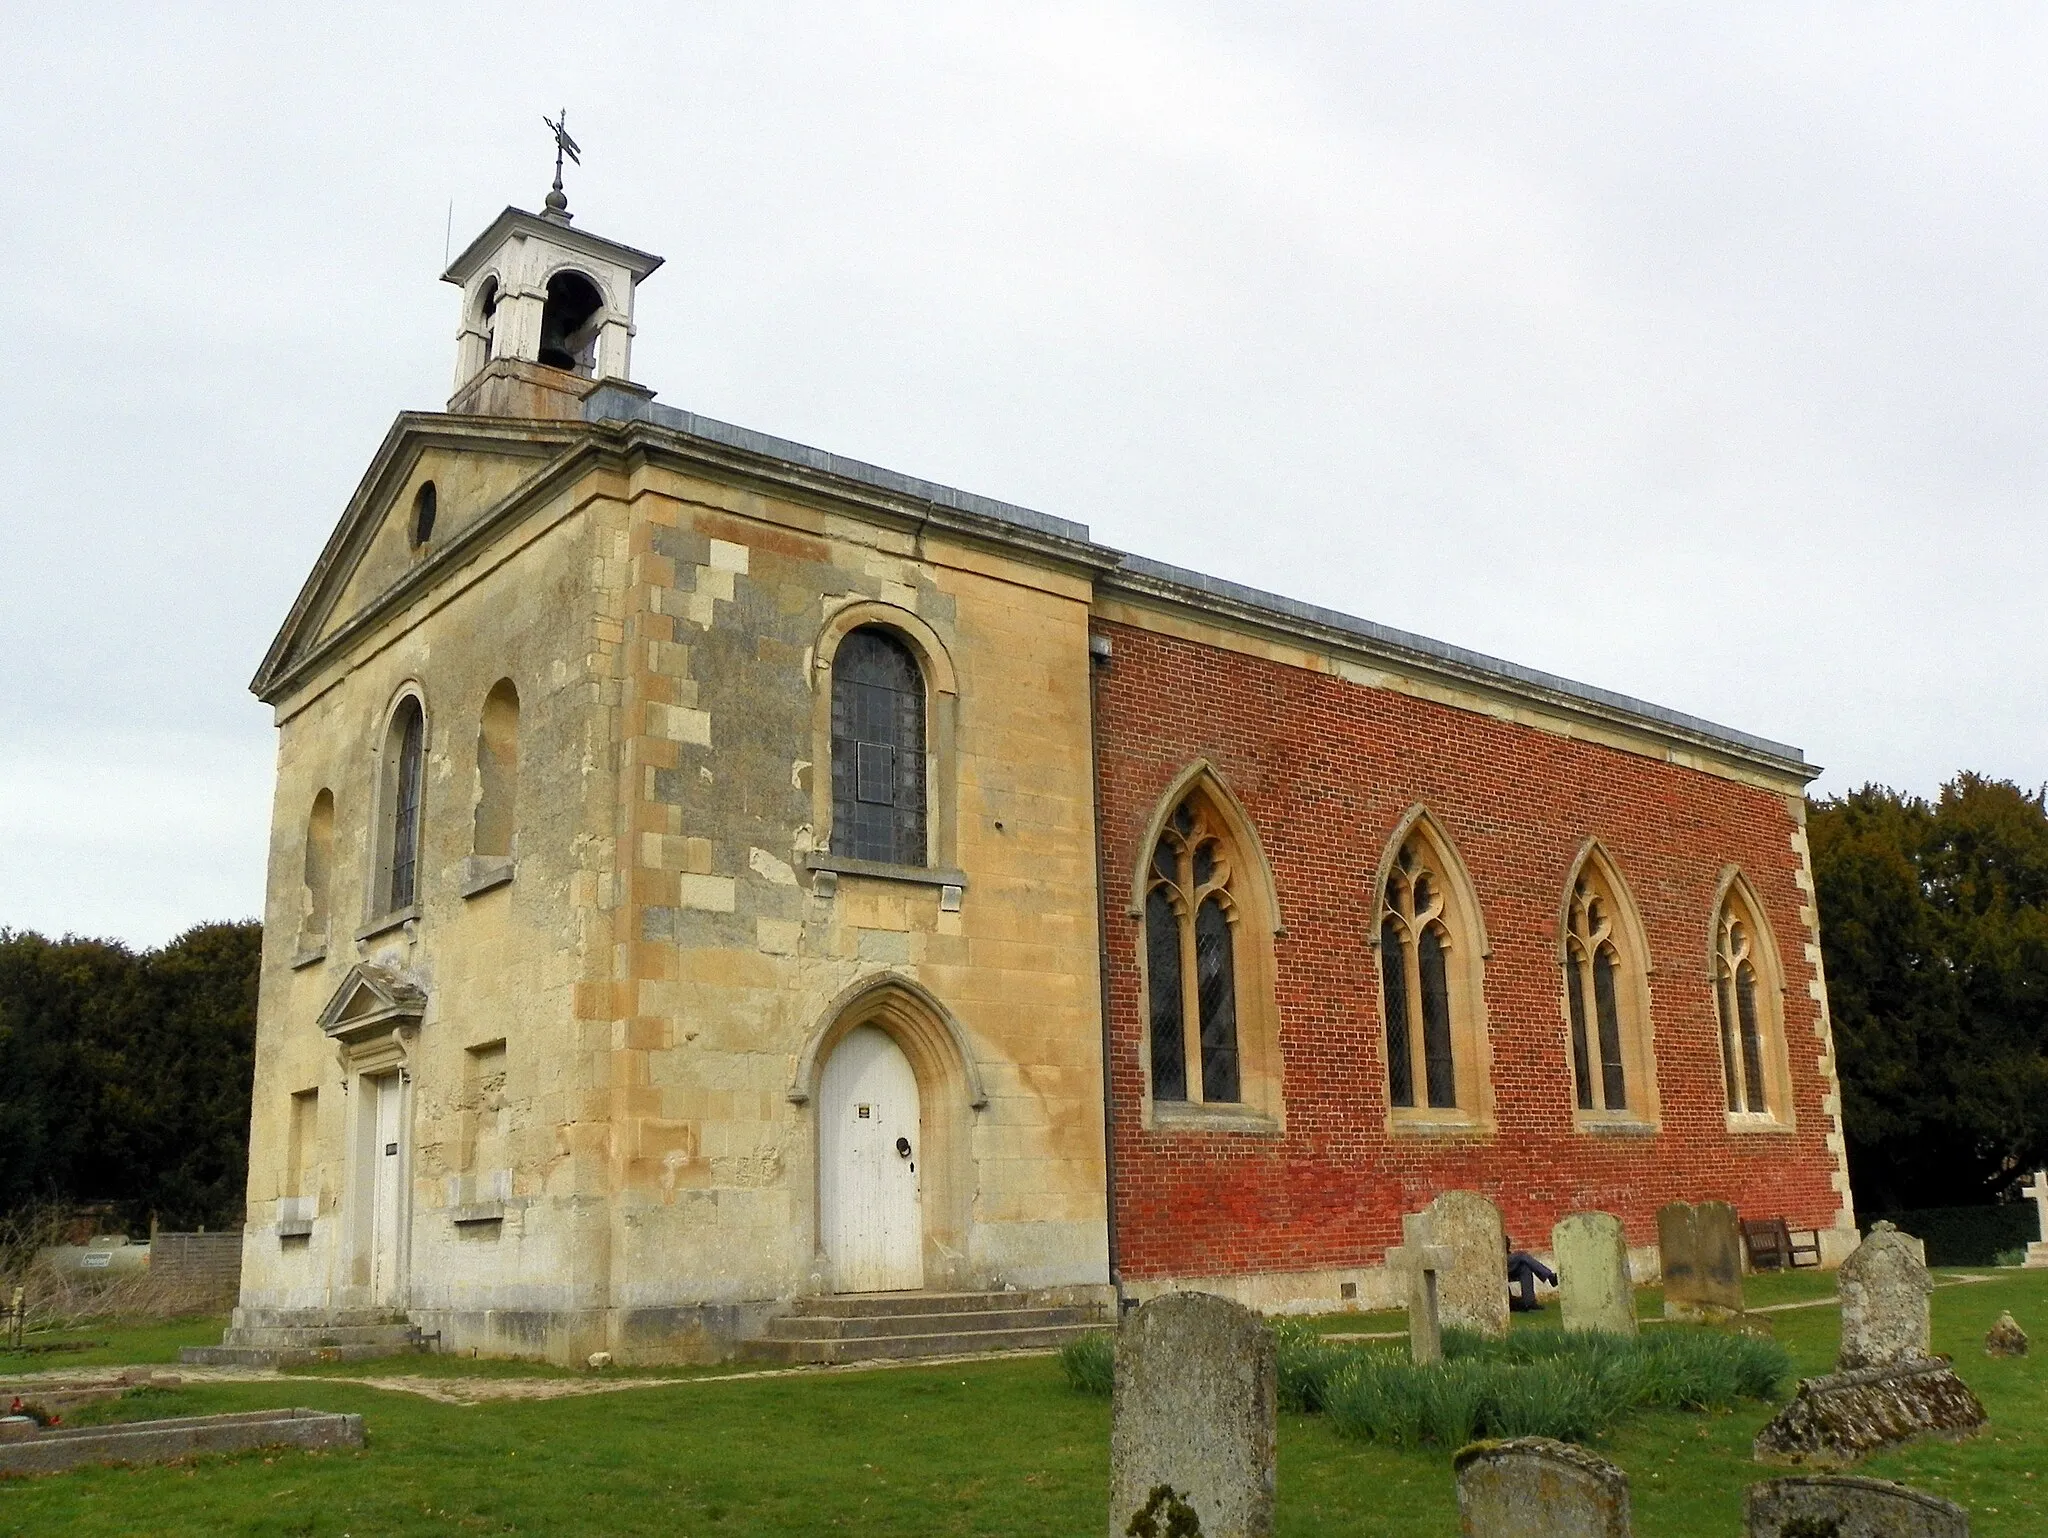 Photo showing: St Andrew's Church, Wimpole, Cambridgeshire. The church is independent from the National Trust, and is Grade II* listed. This was my first visit to the Wimpole Estate, on 19 March 2014.